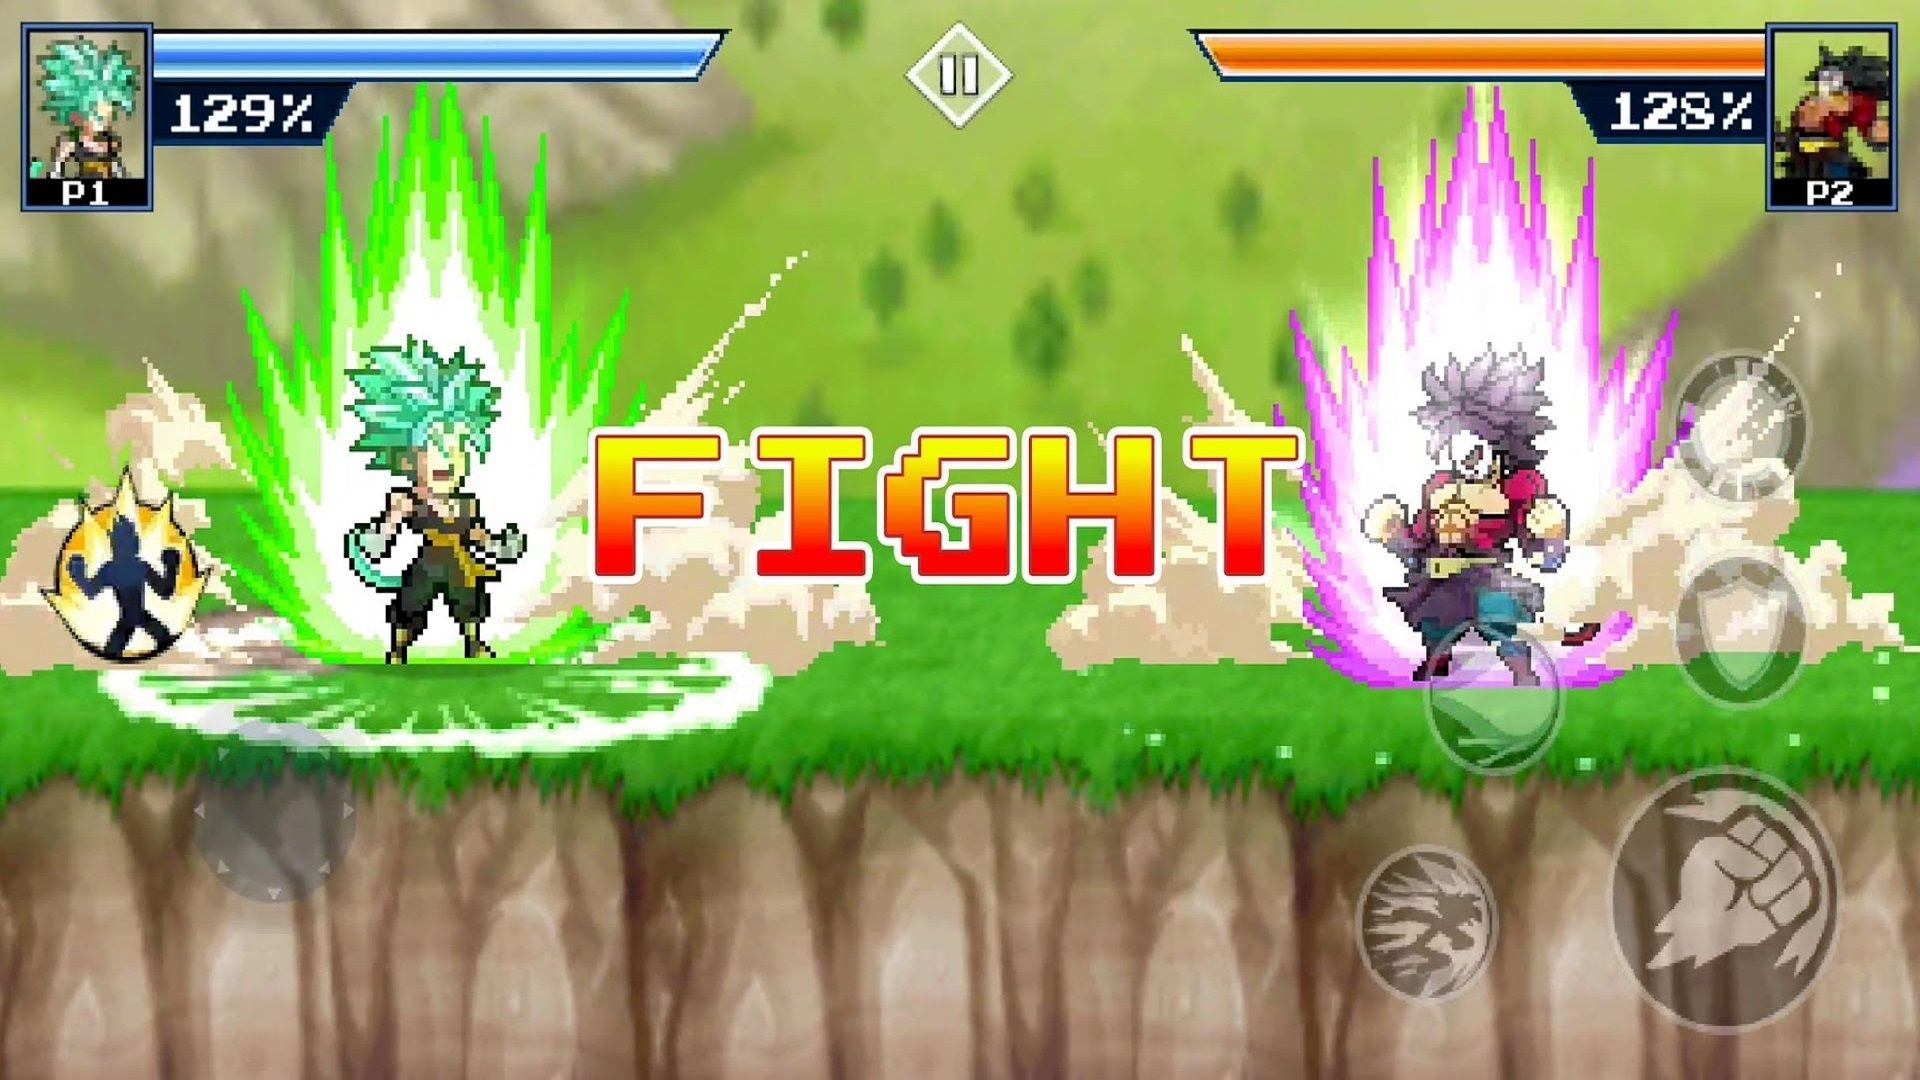 Dragon Ball Z Fighter King hack online tool - android/ios